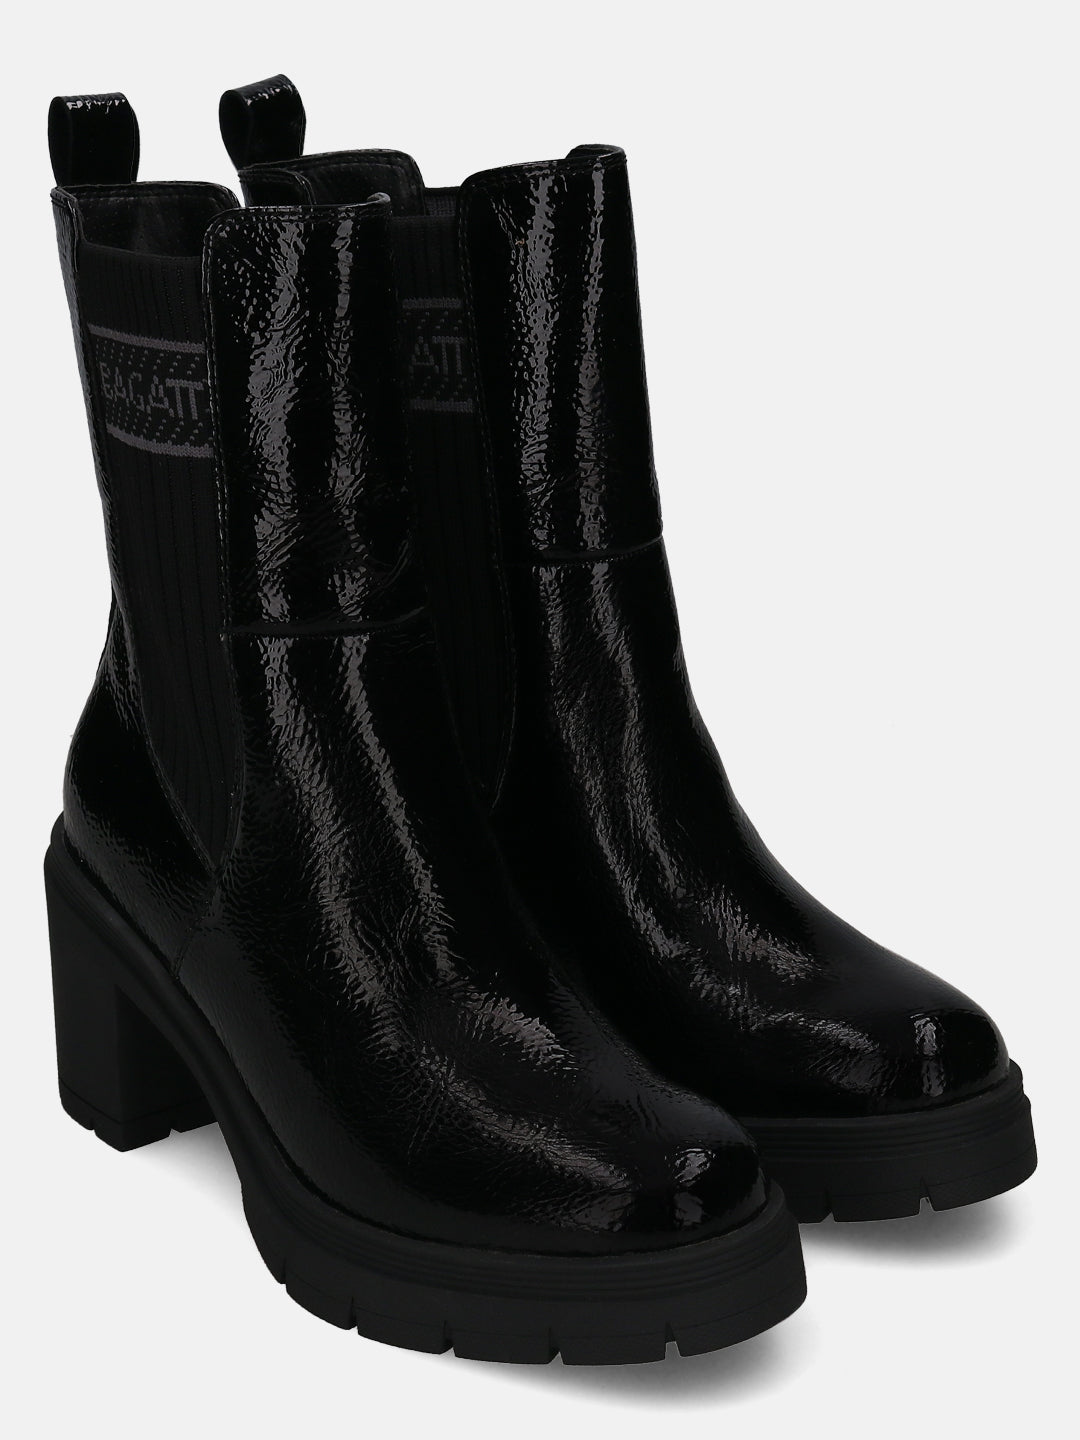 Joely Black Chelsea Boots